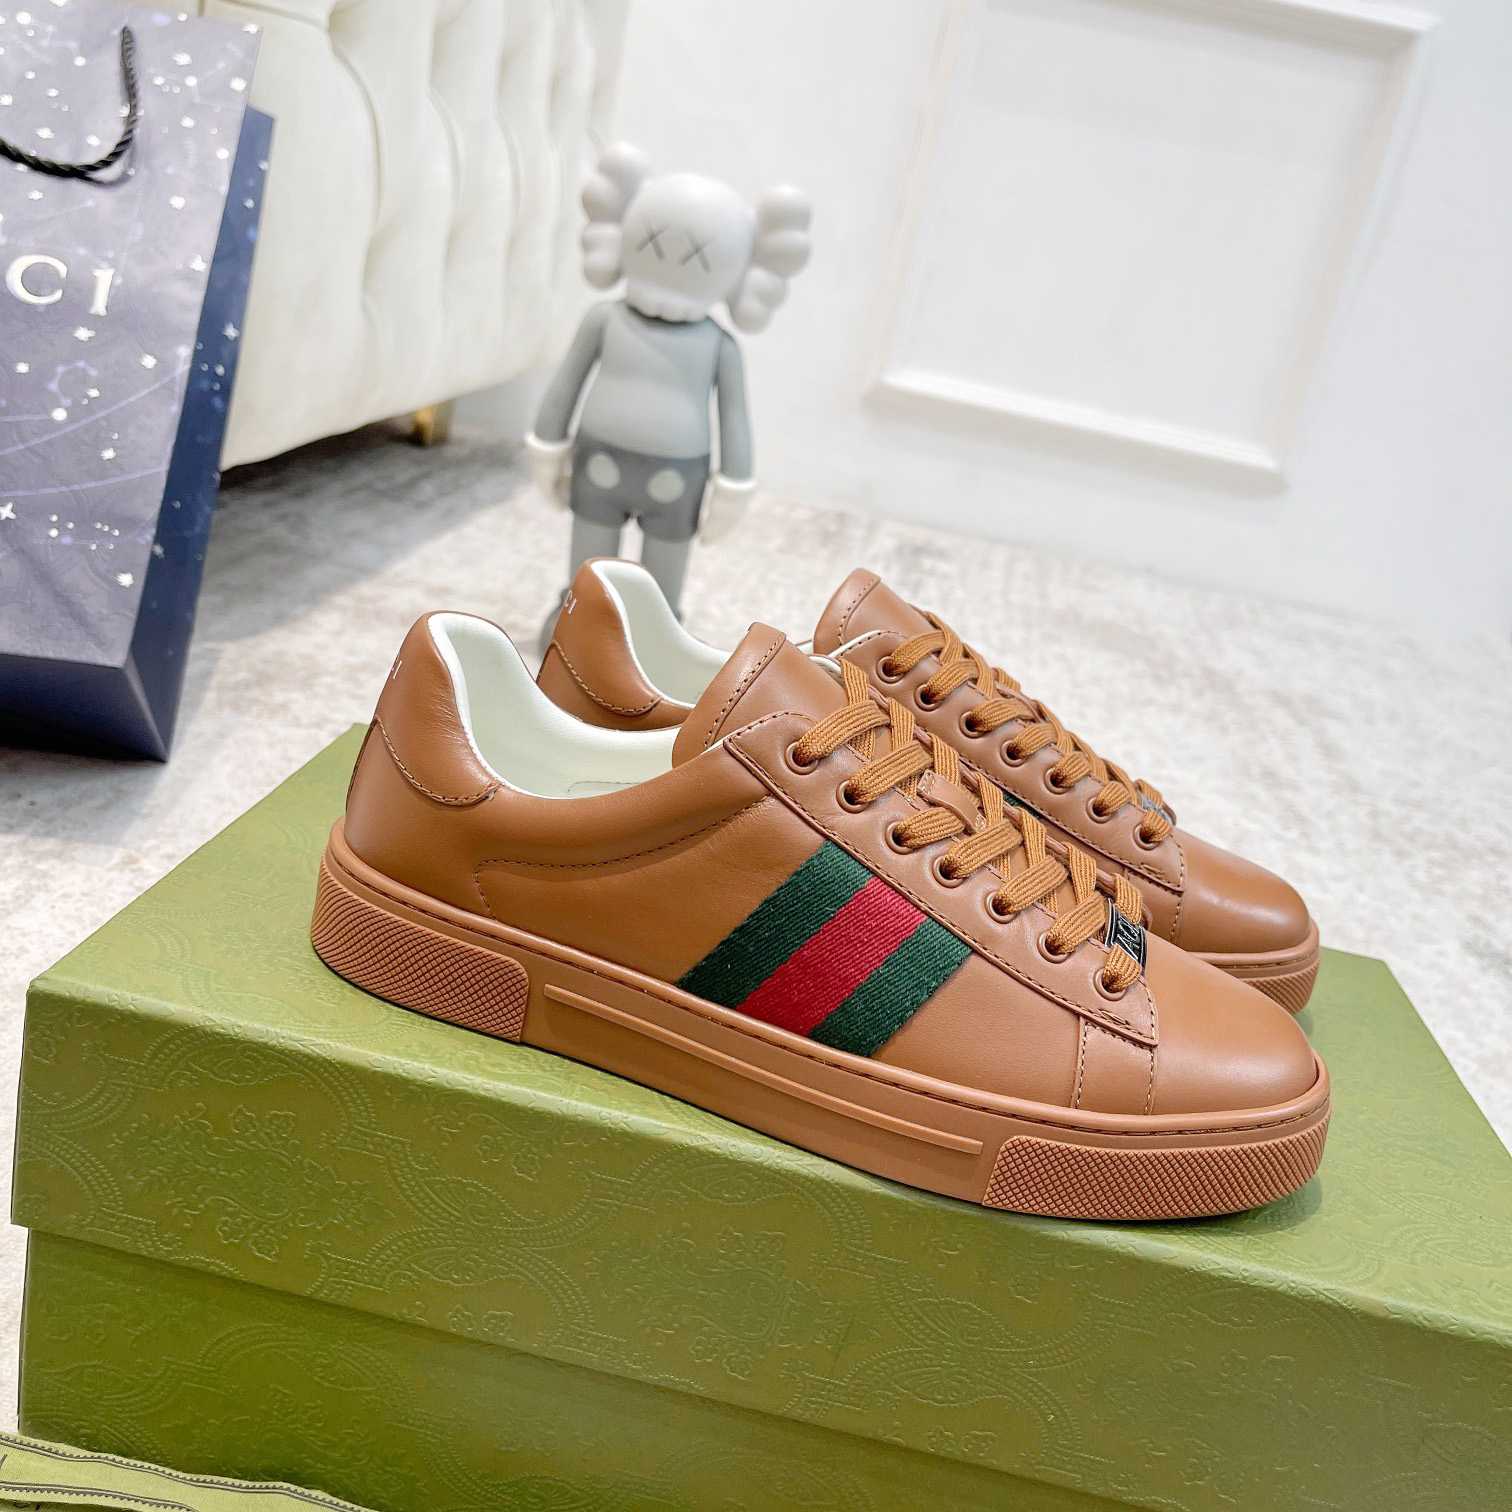 Gucci Ace Sneaker With Web (upon uk size) - DesignerGu